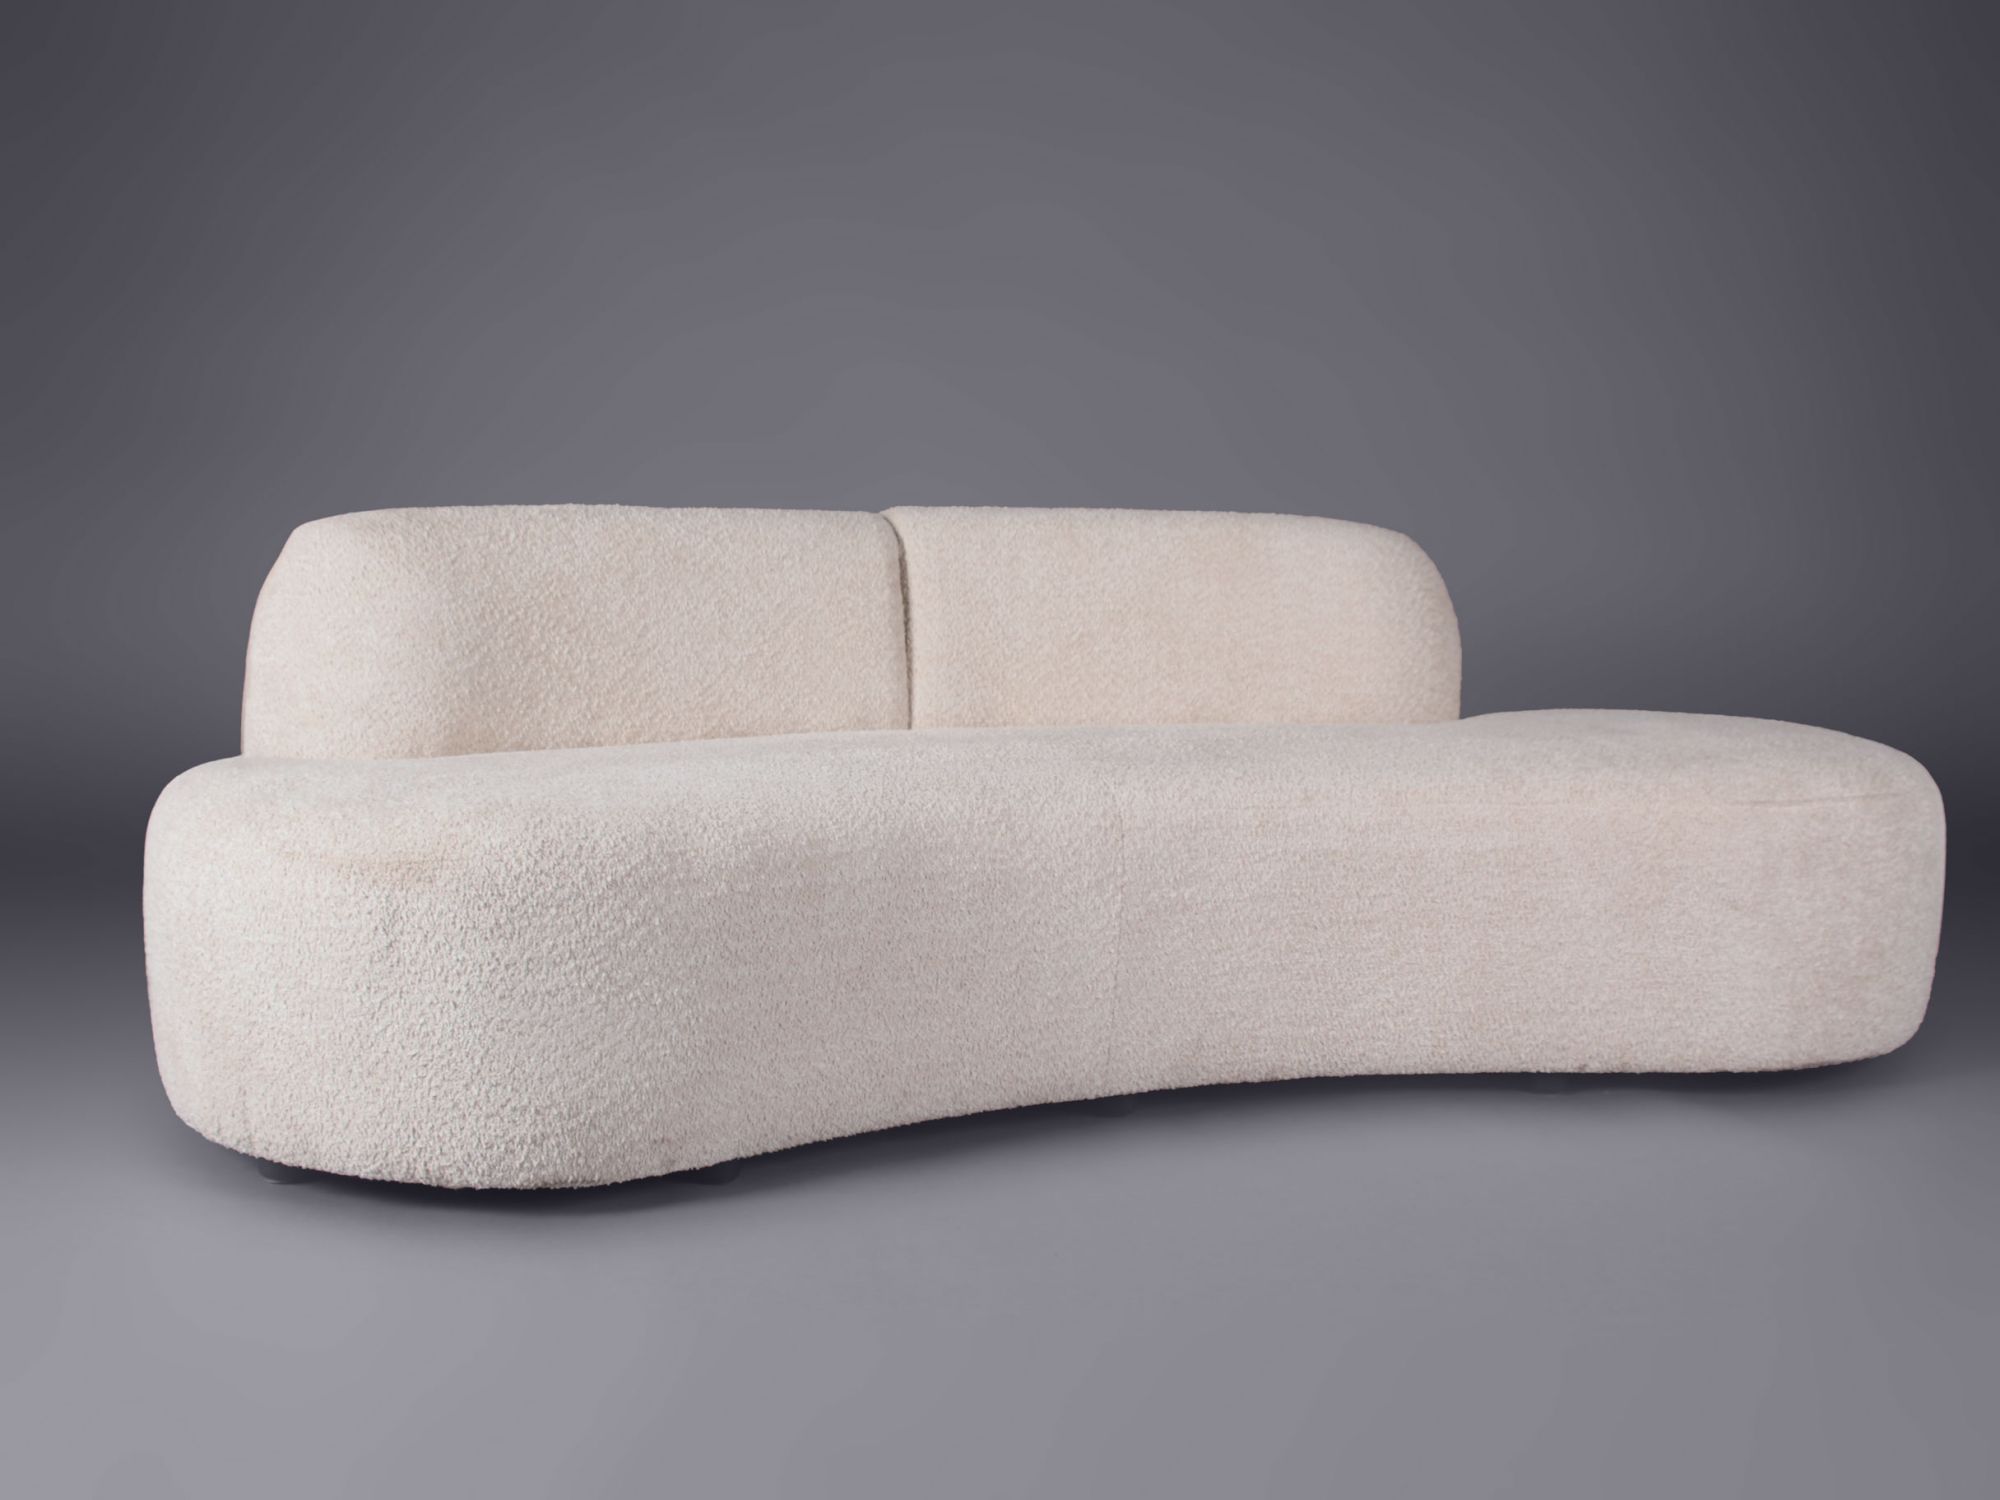 Stylish Atlanta sofa, in a trendy and soft bouclé fabric by Furniture On The Move